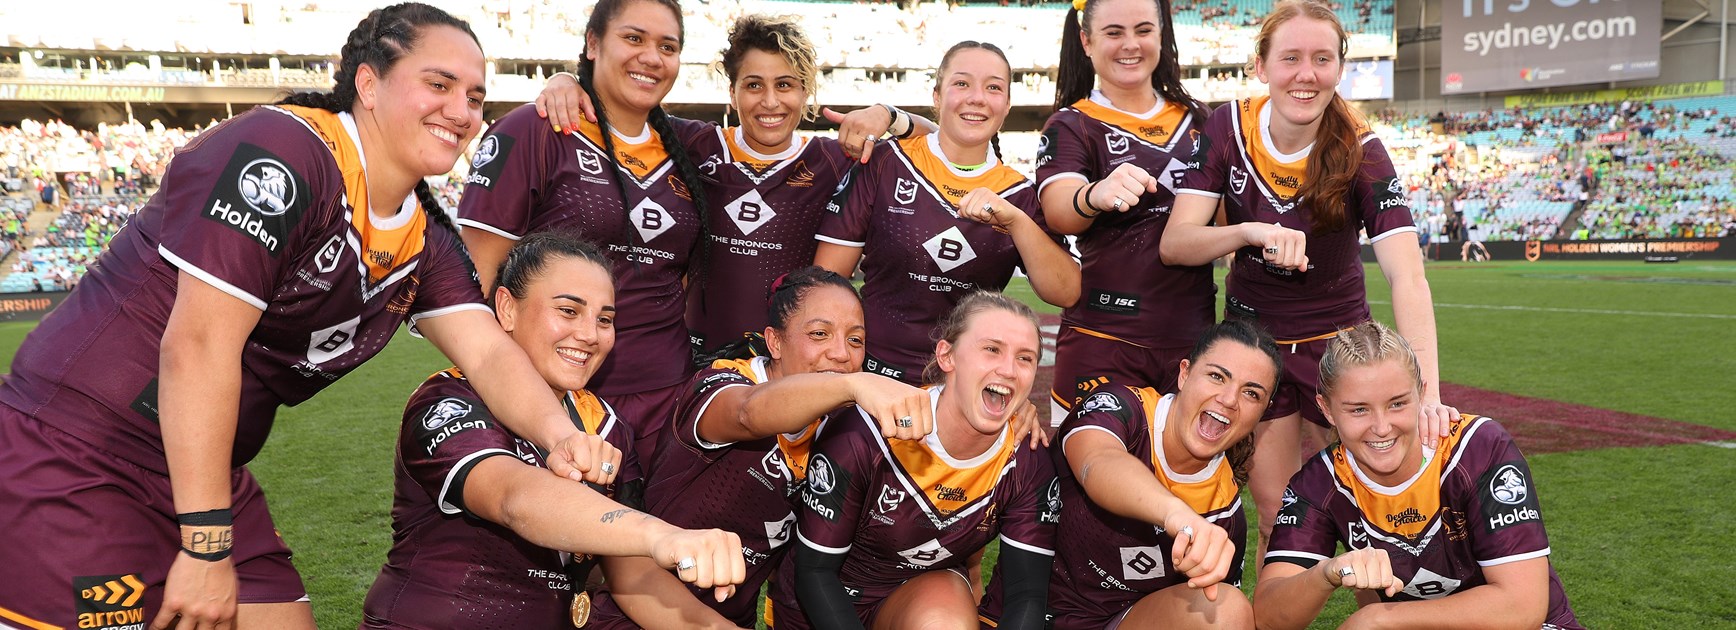 Women's Rugby League elite competition confirmed for 2020